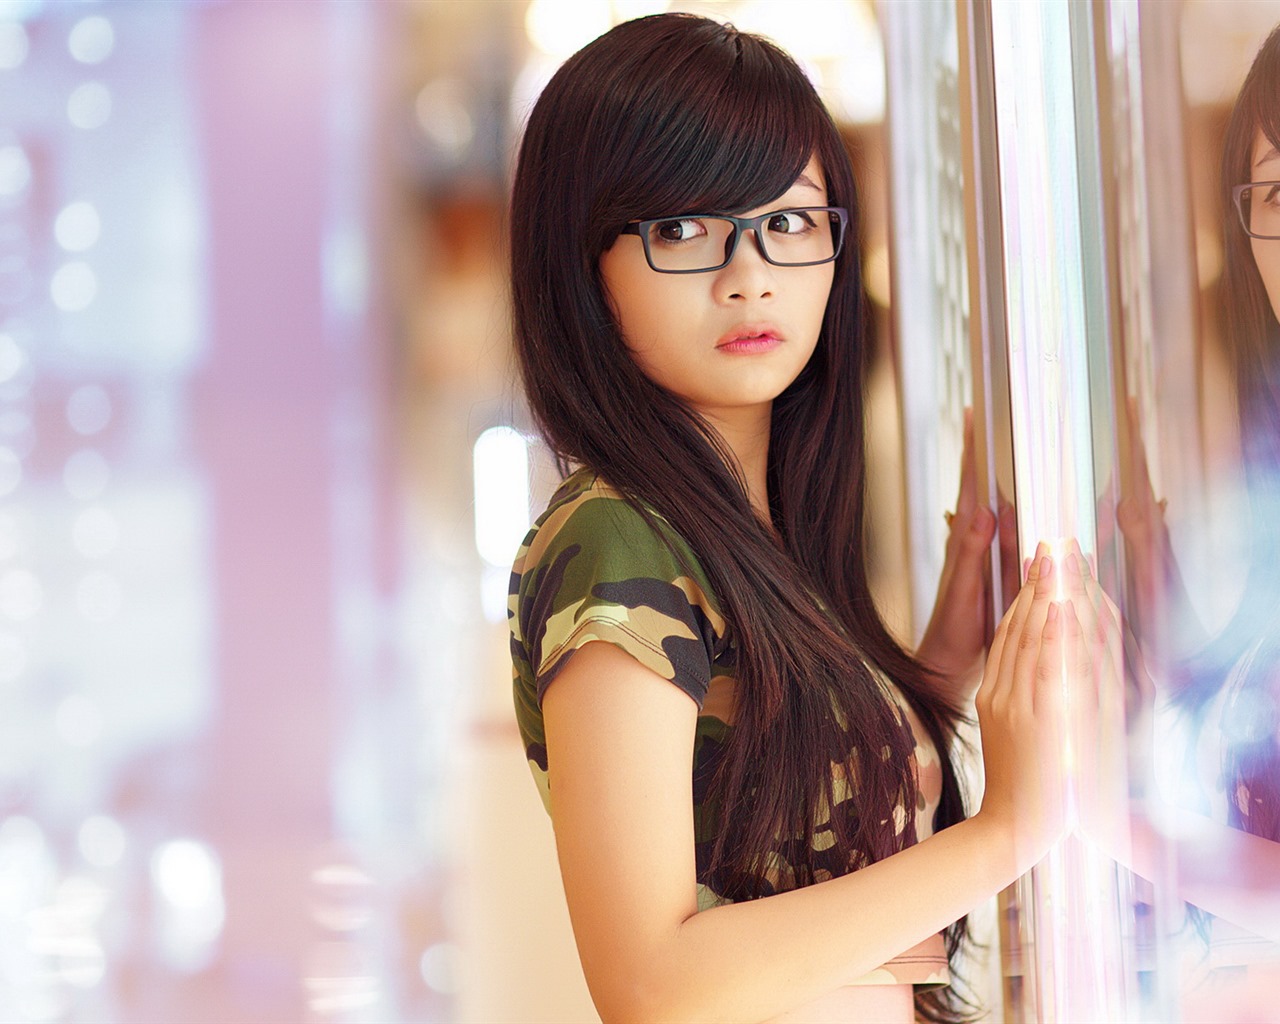 Pure and lovely young Asian girl HD wallpapers collection (3) #36 - 1280x1024